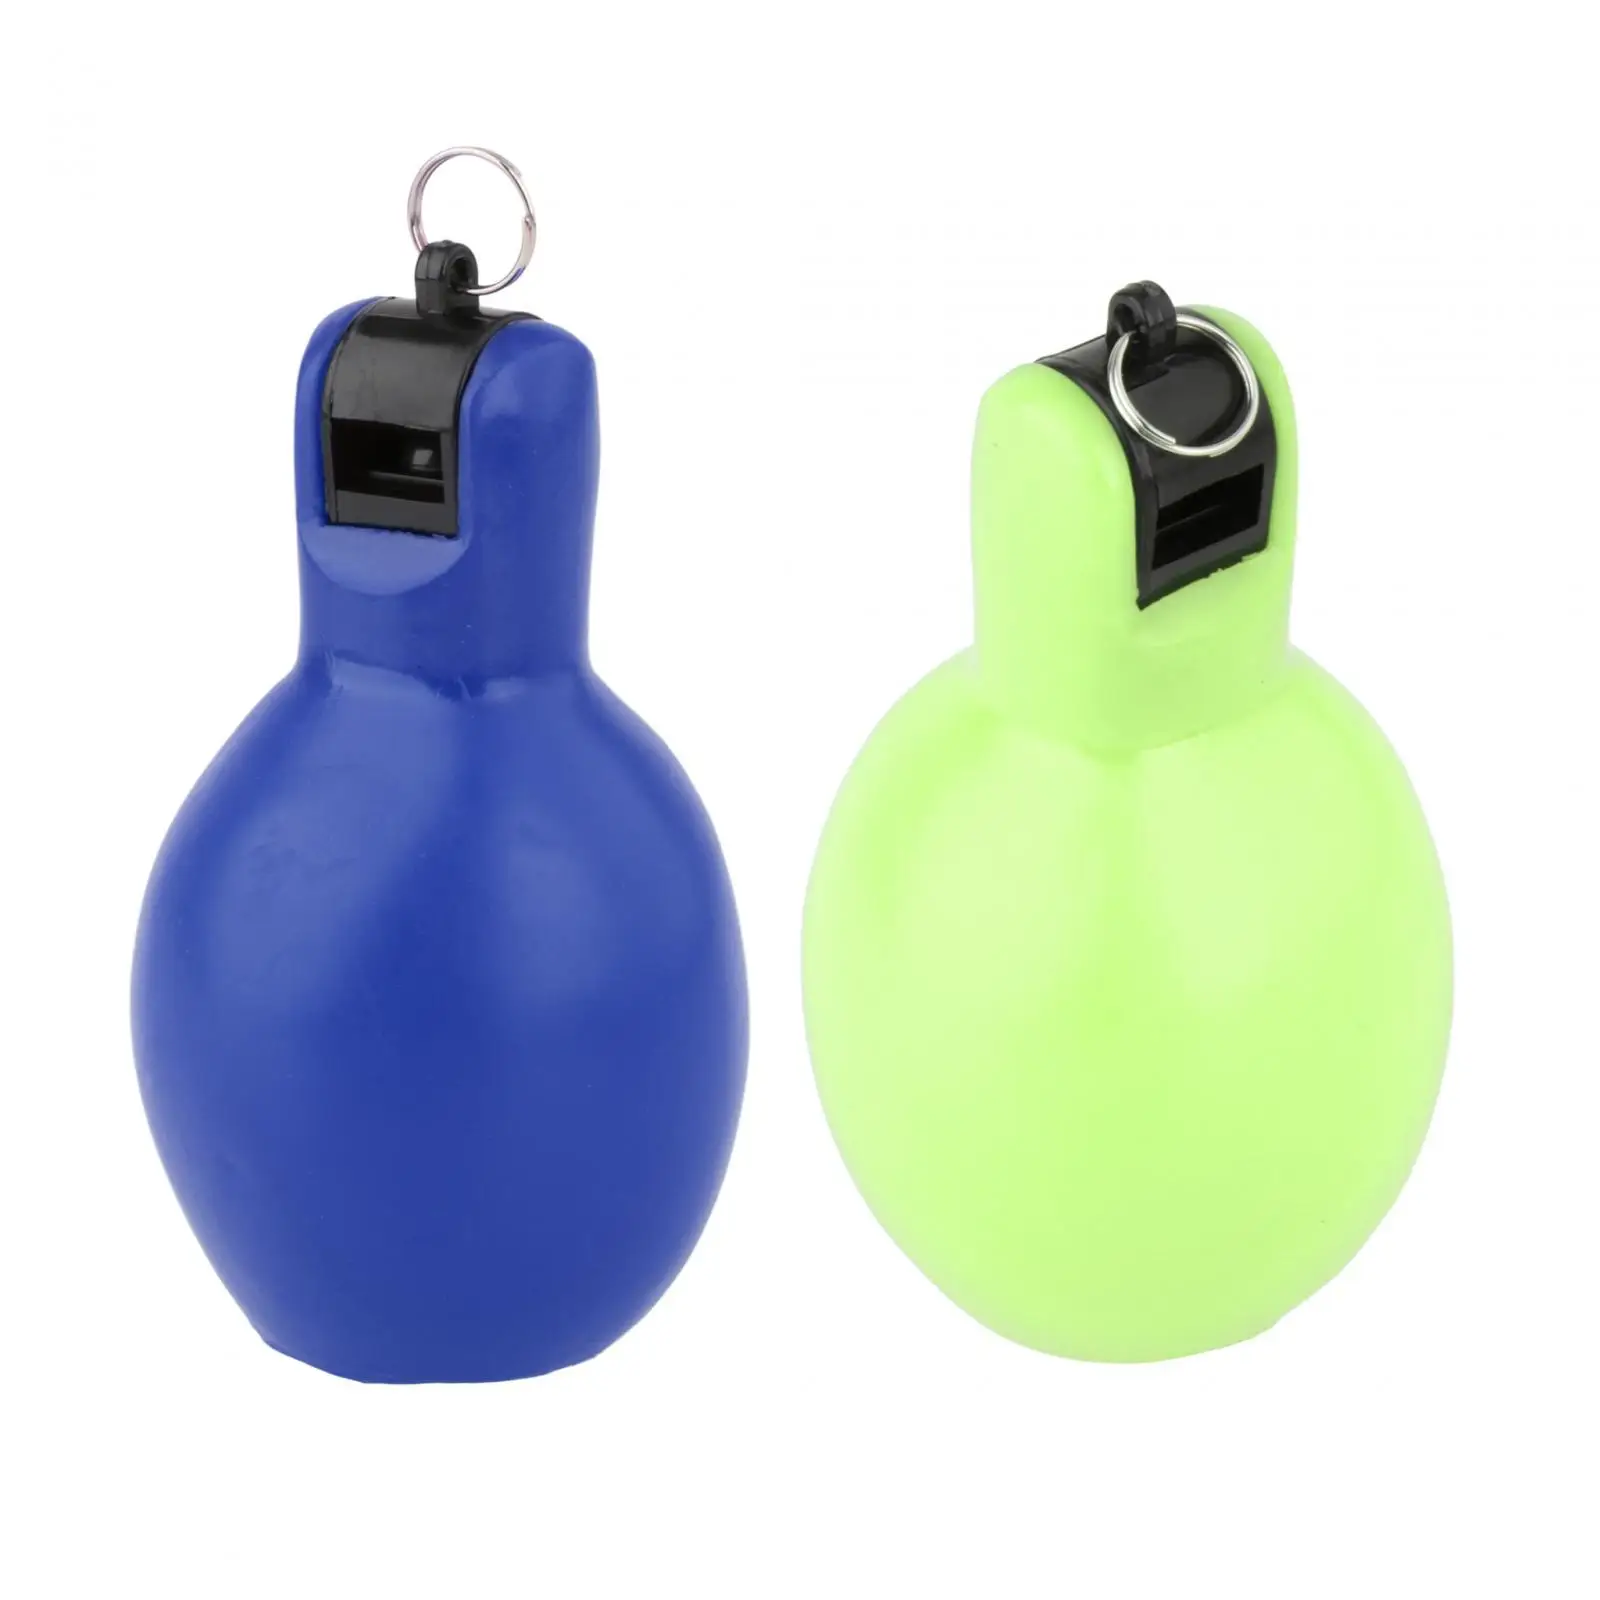 2x Hand Squeeze Whistles Coaches Whistle Loud Manual Sports Whistle Trainer